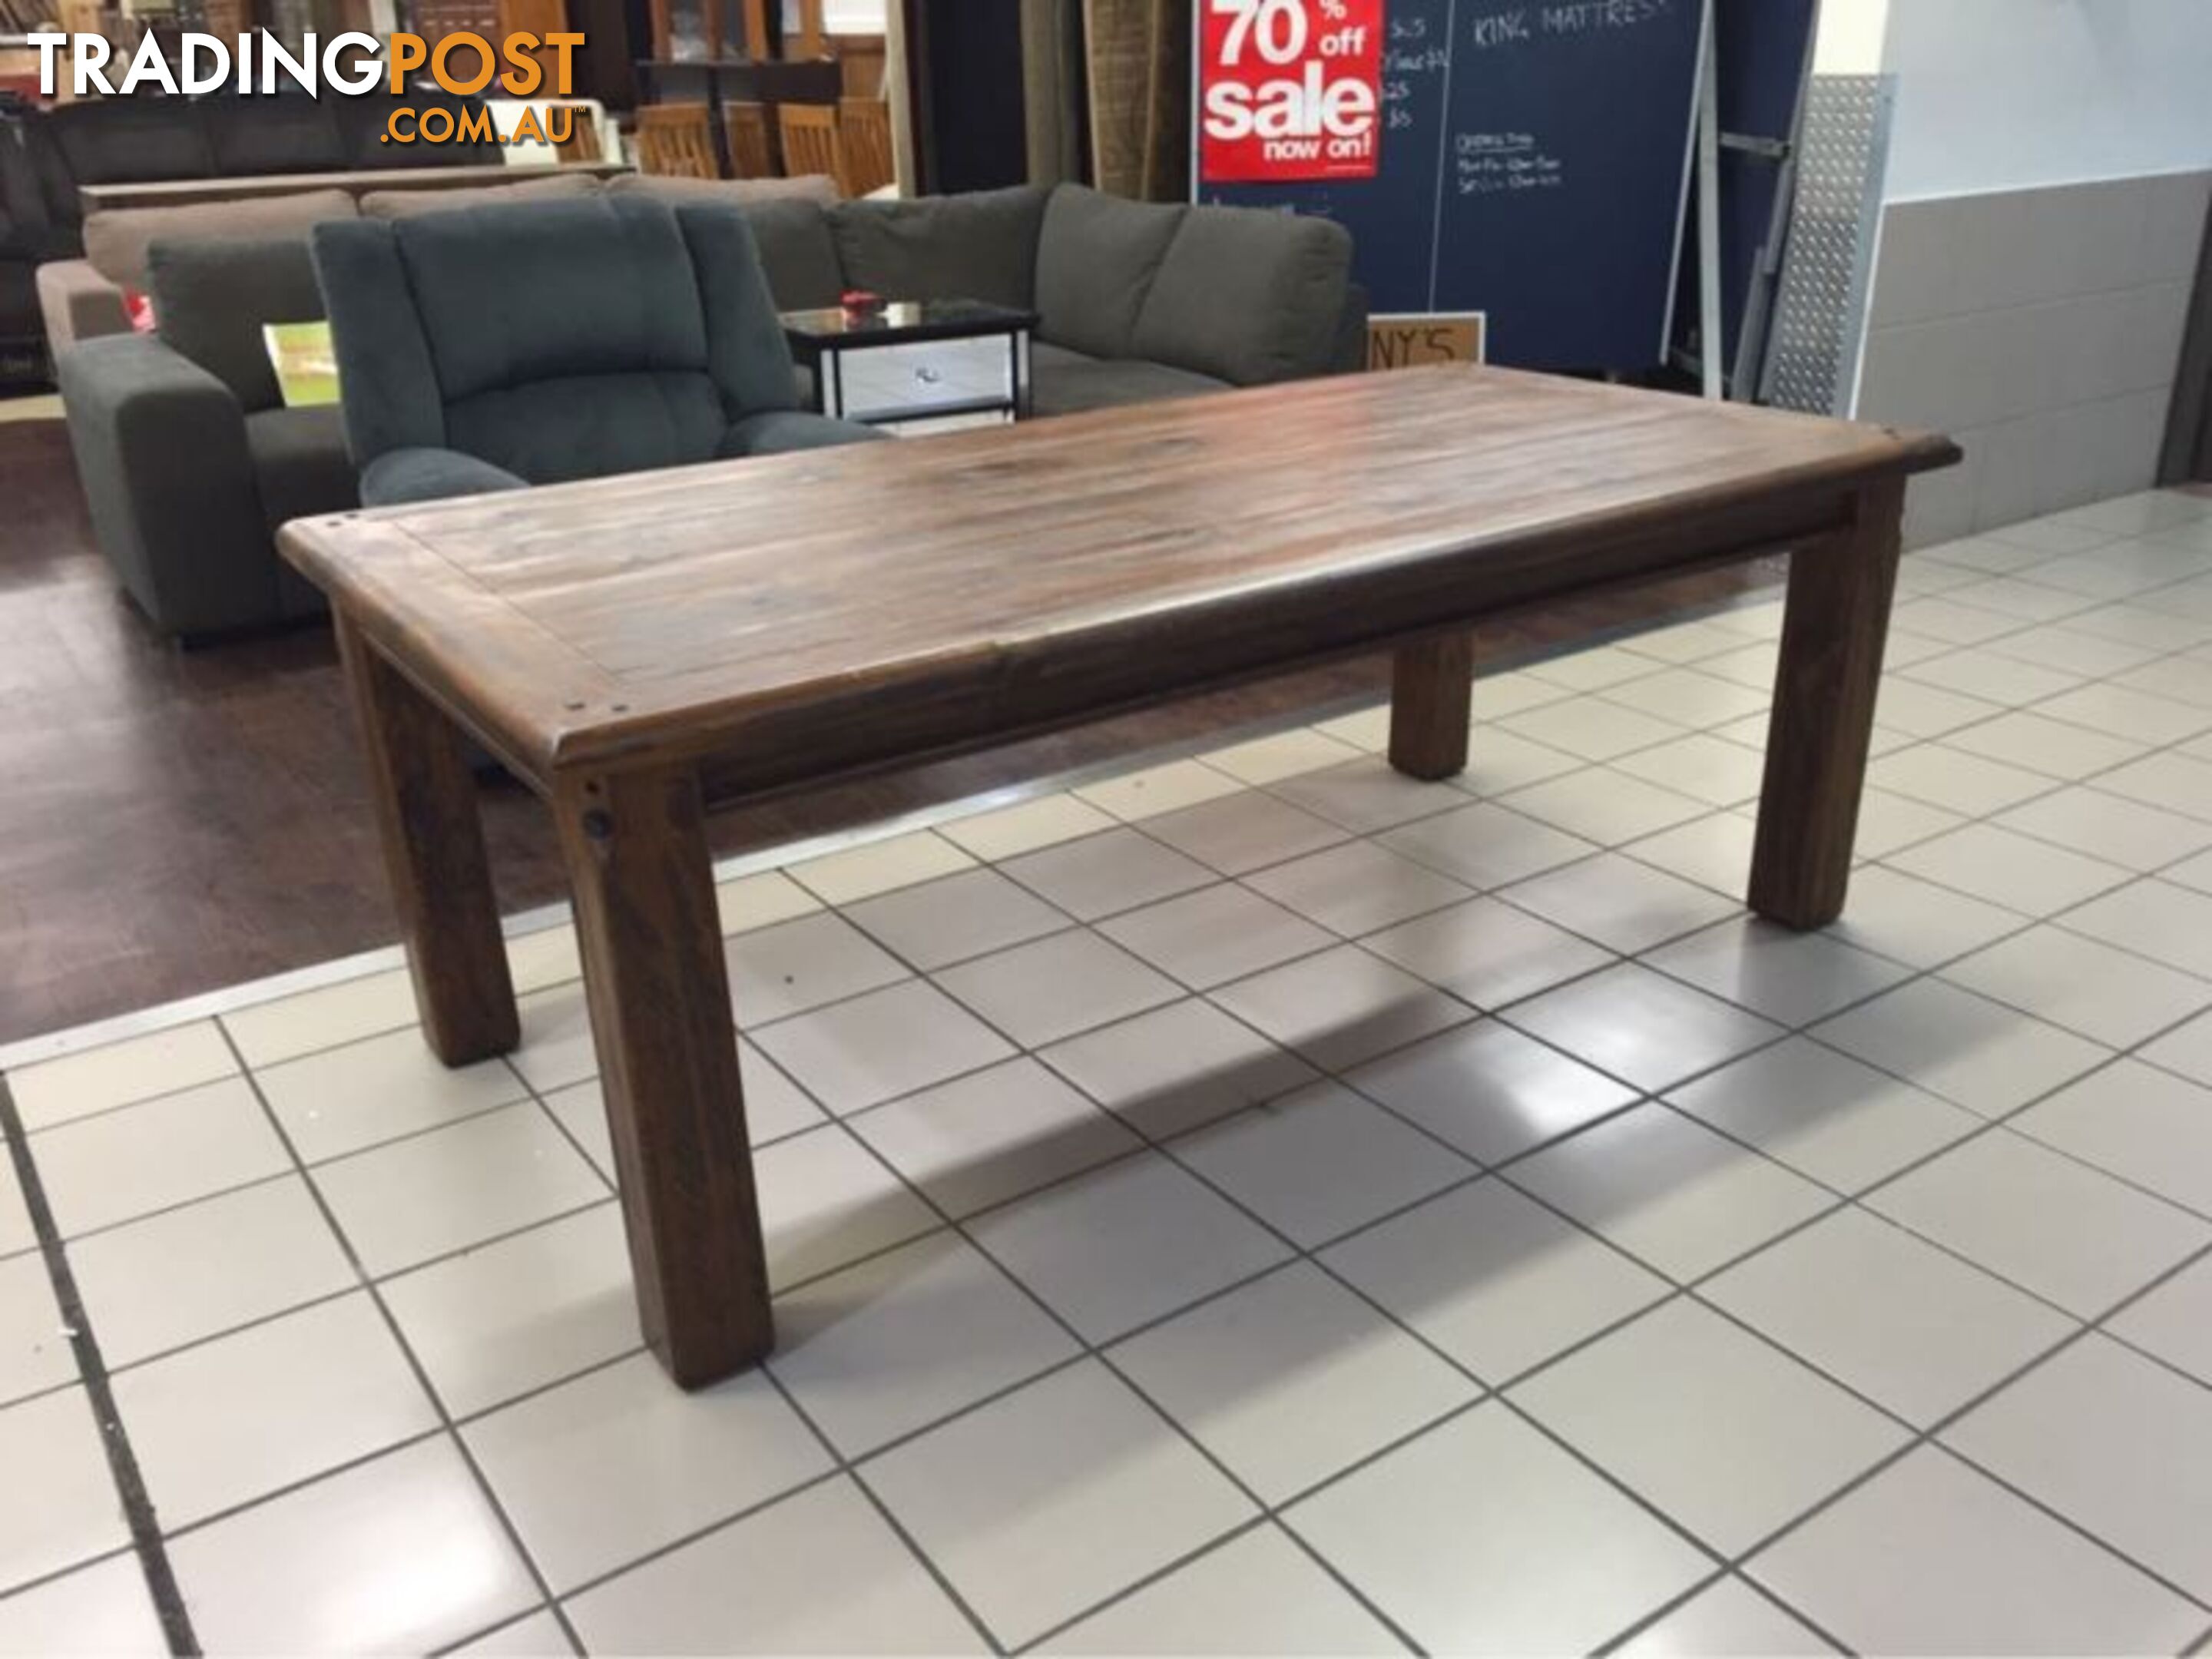 BRAND NEW - FARMHOUSE DINING TABLE - SOLID TIMBER